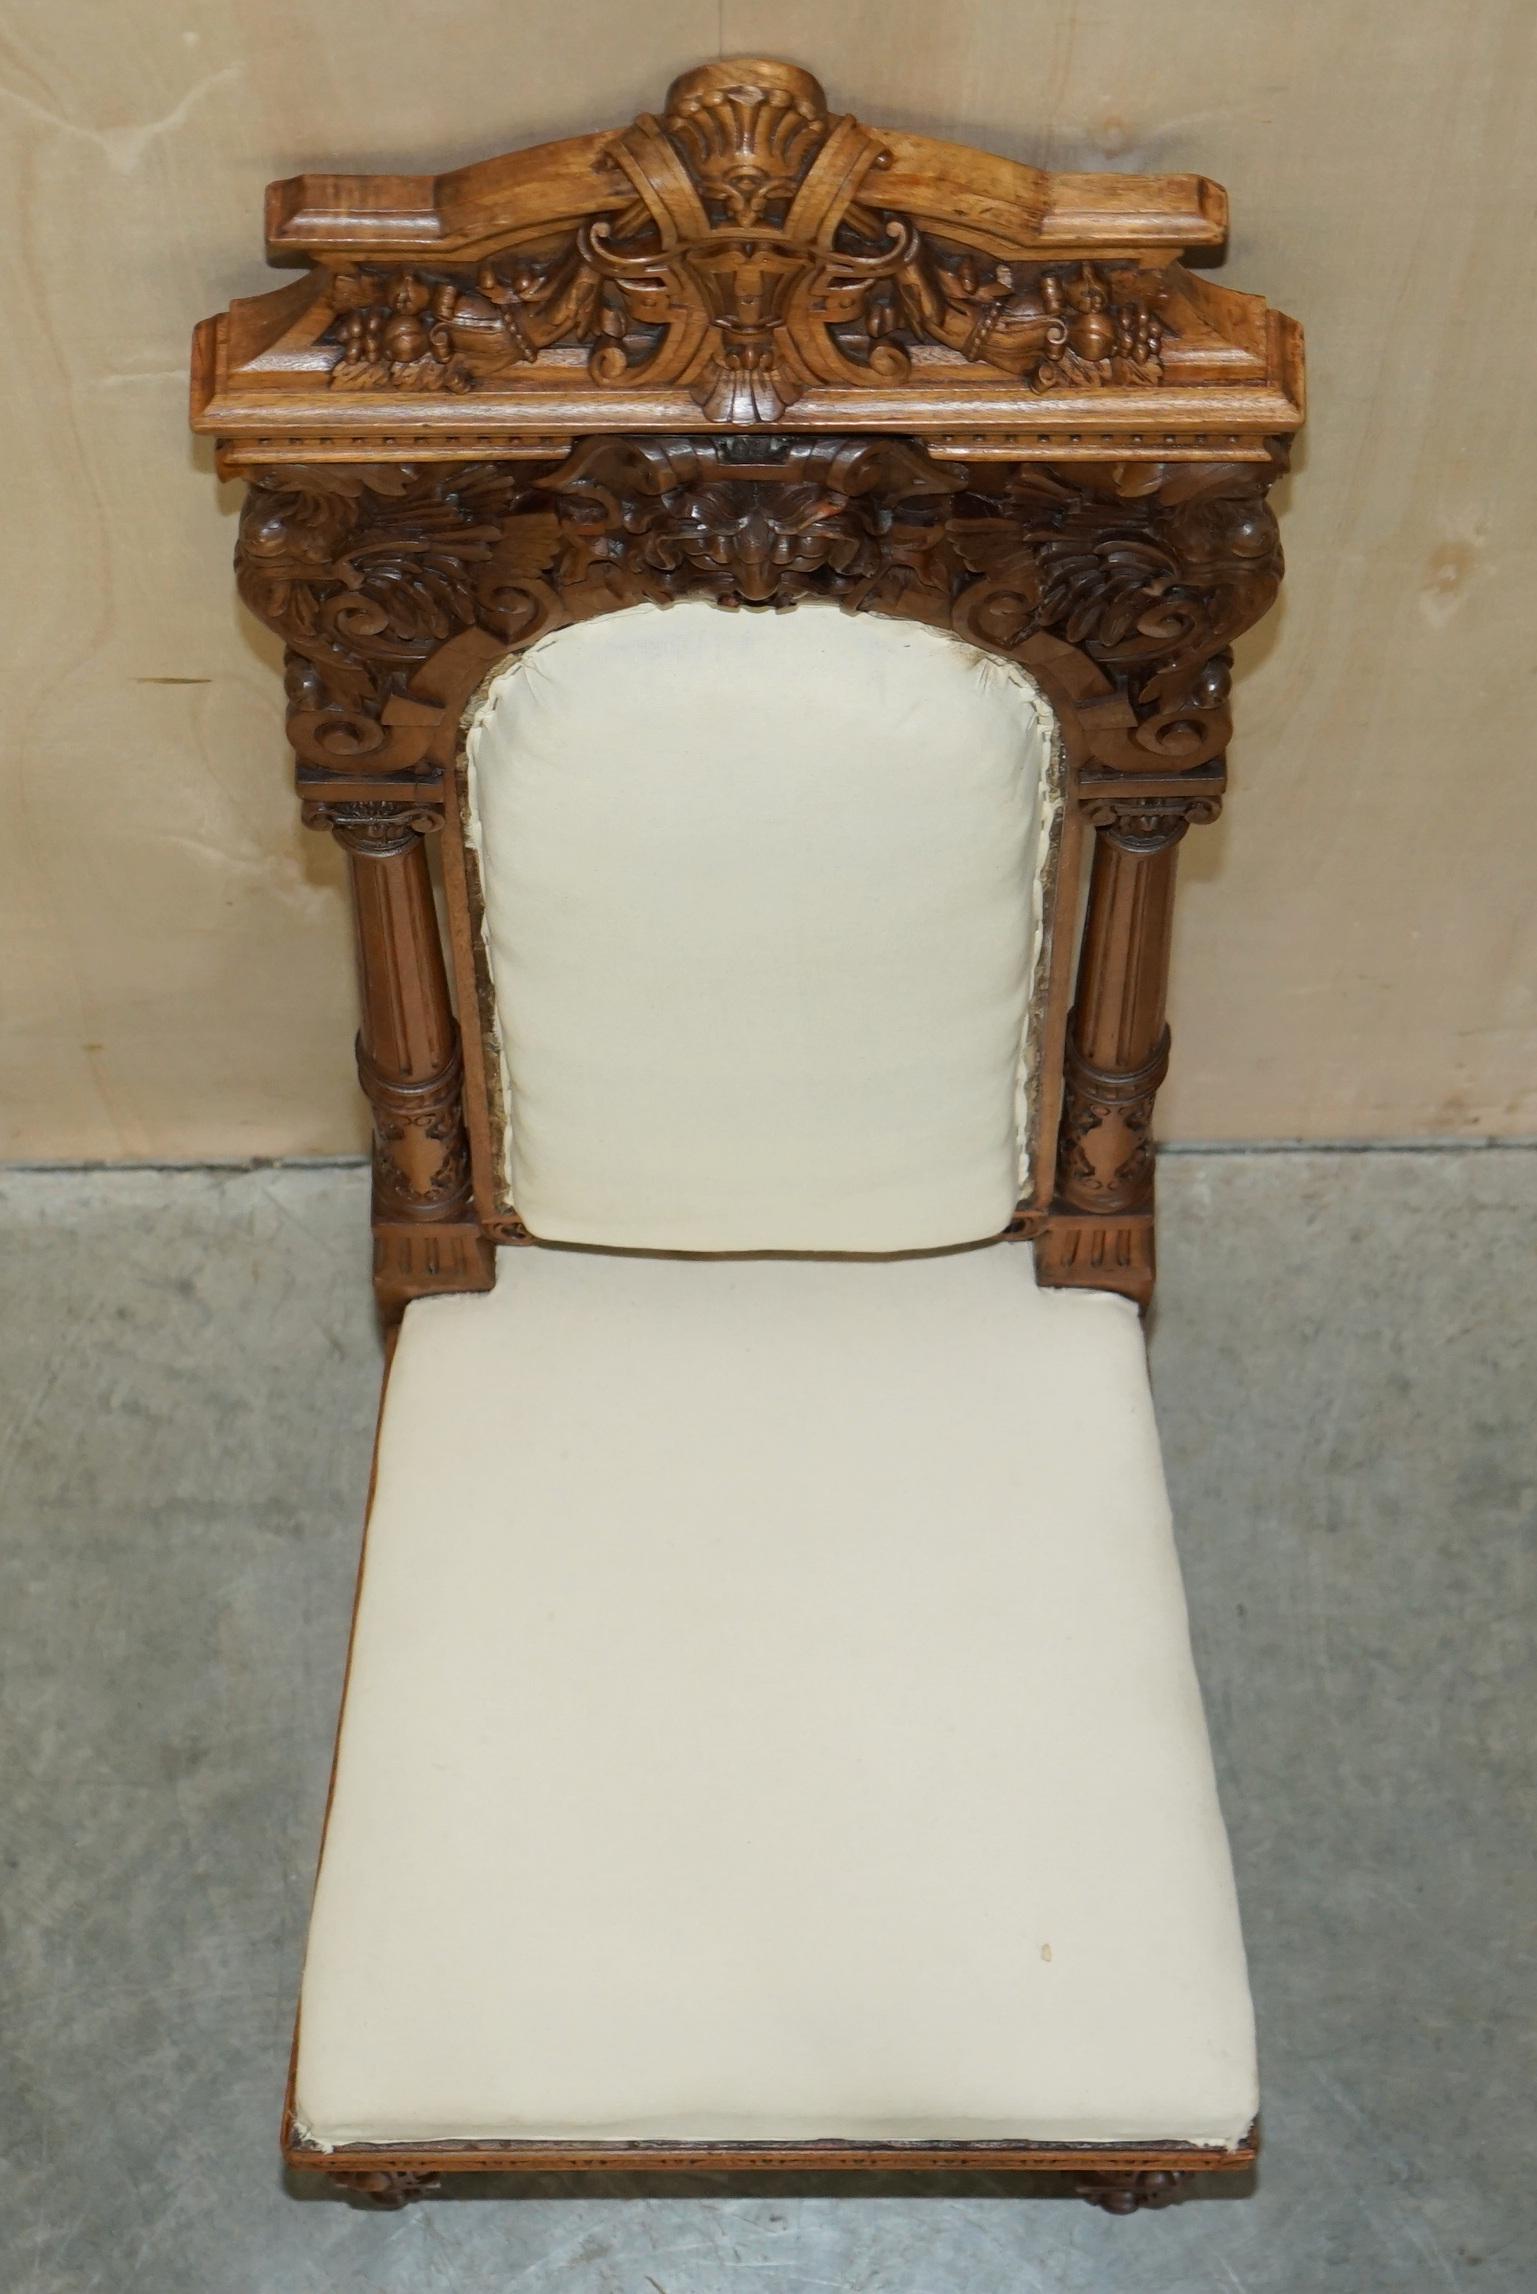 Pair of Ornate Carved Antique Italian Throne Chairs with Griffins / Dragons For Sale 8